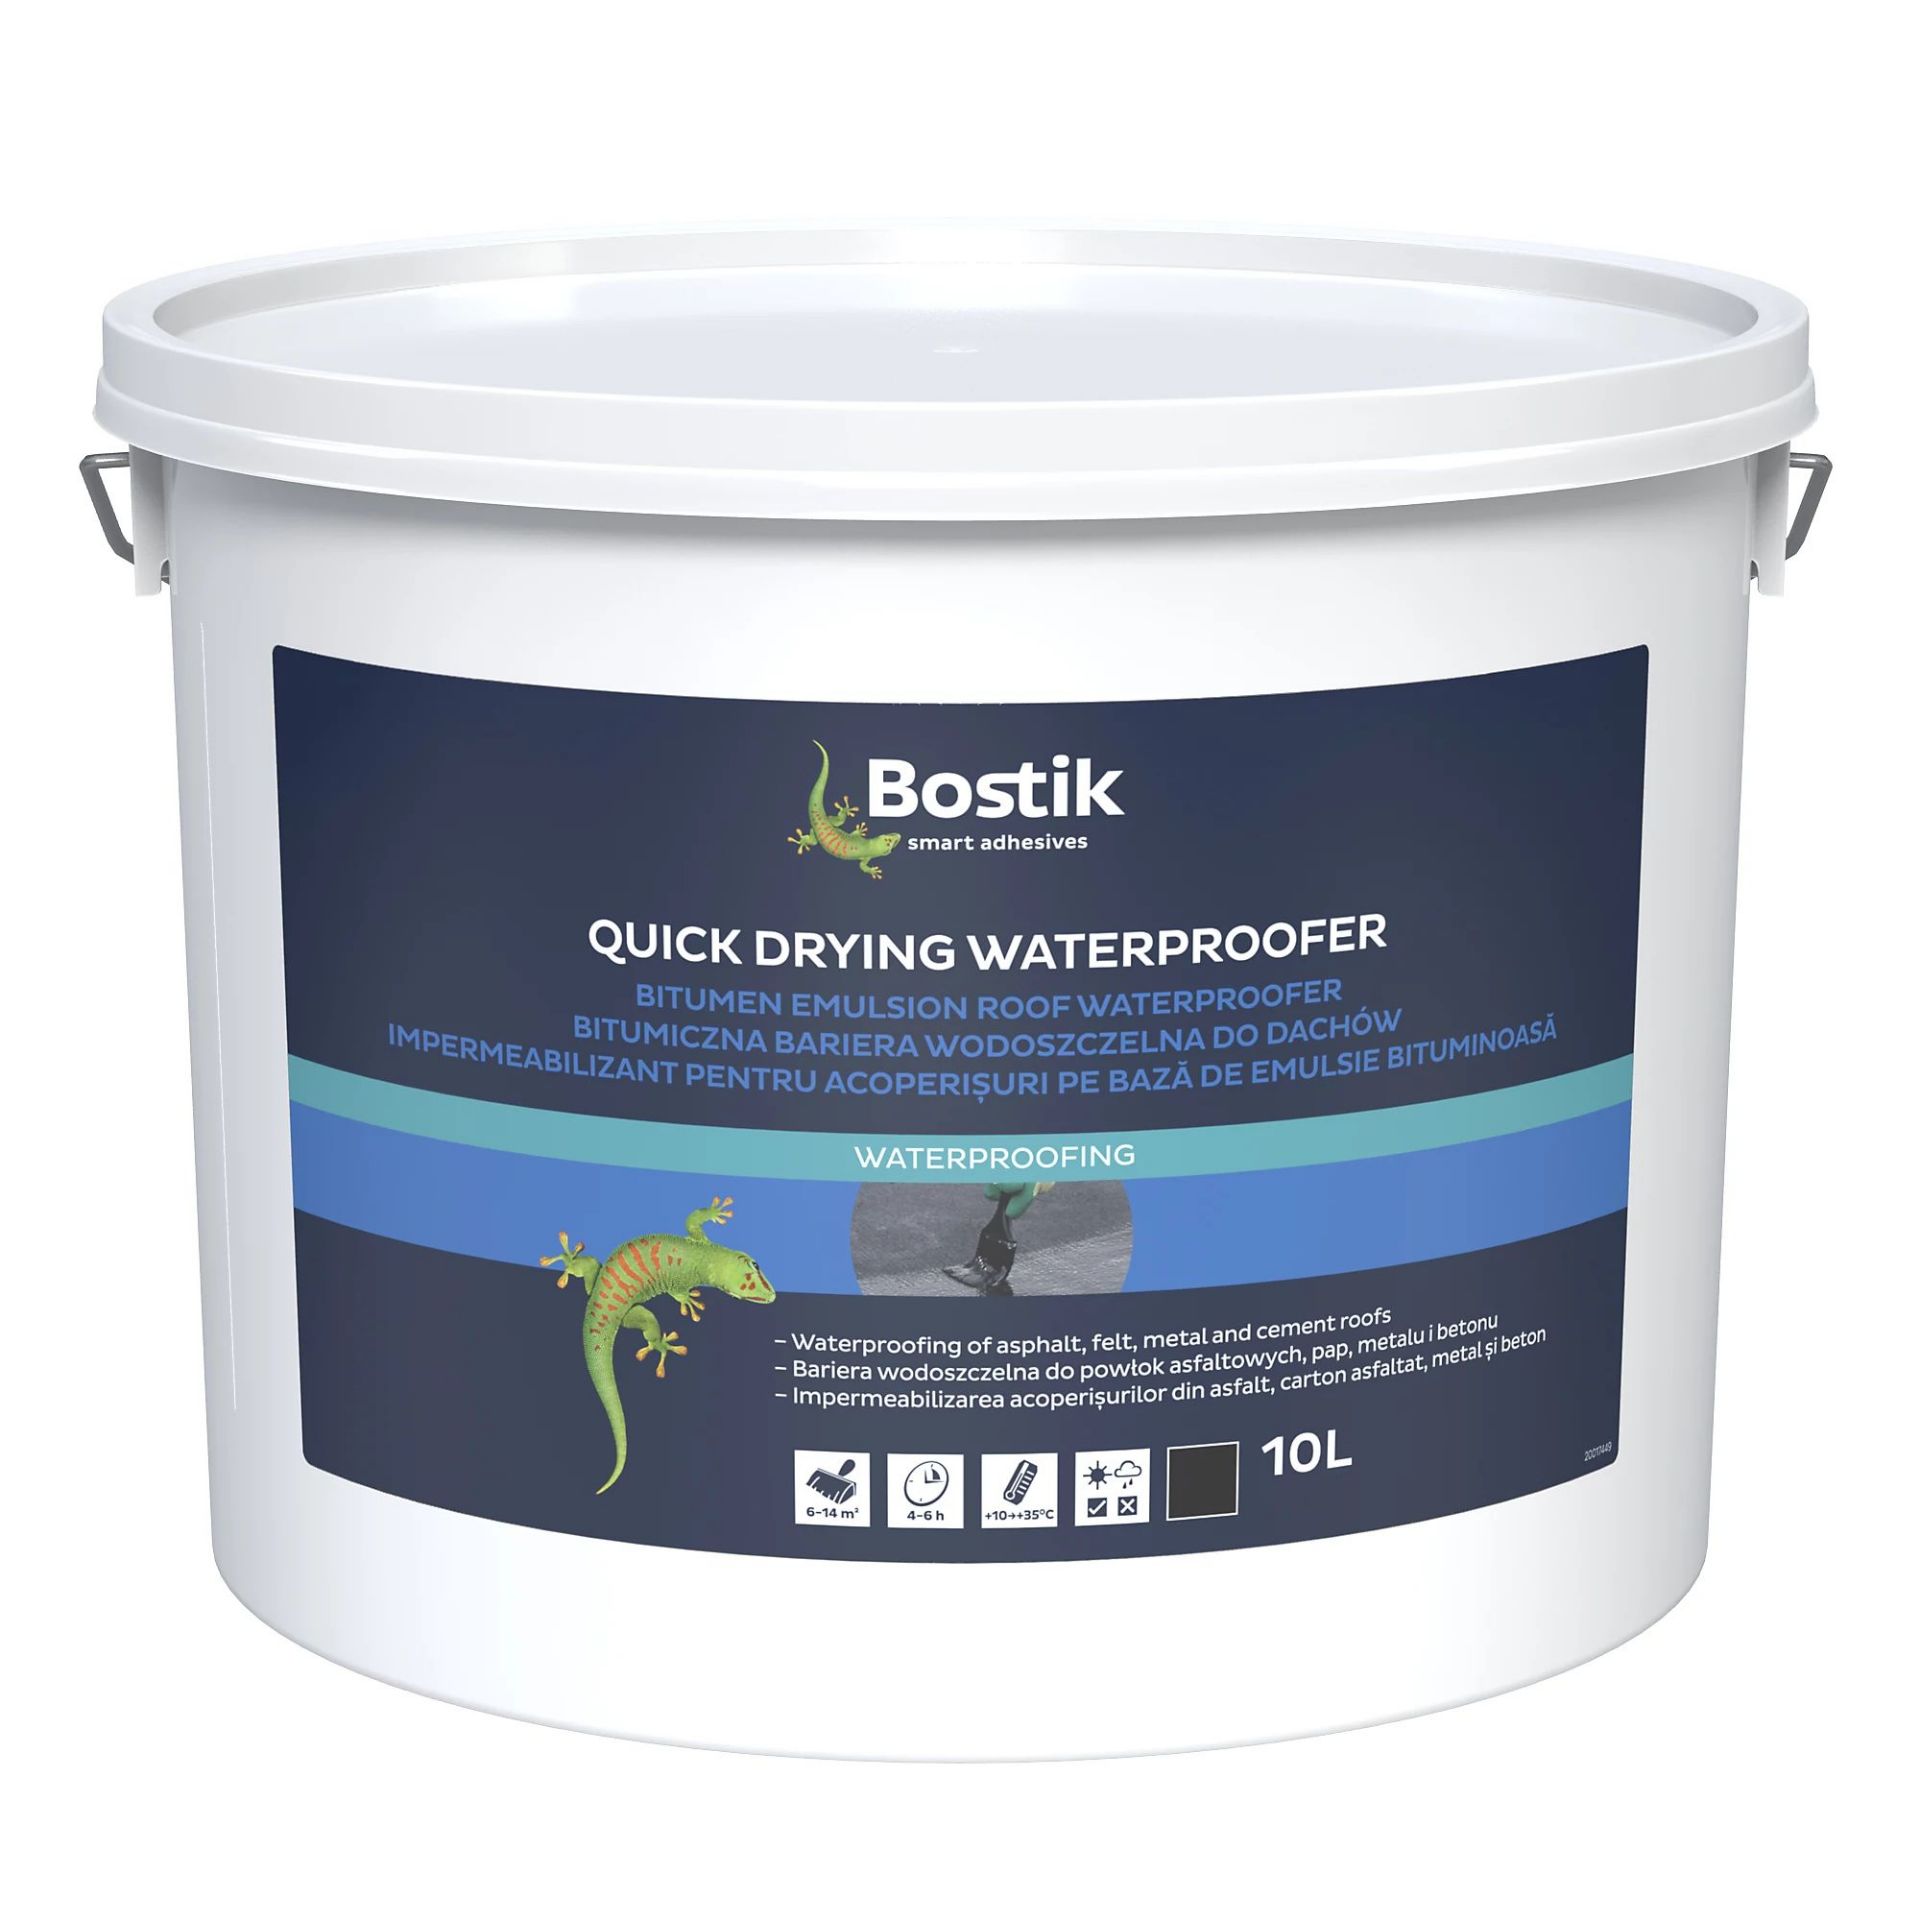 5x BRAND NEW BOSTIK Quick Drying waterproofer 10 Litre. BLACK. RRP £43 EACH. (R5-2). This product is